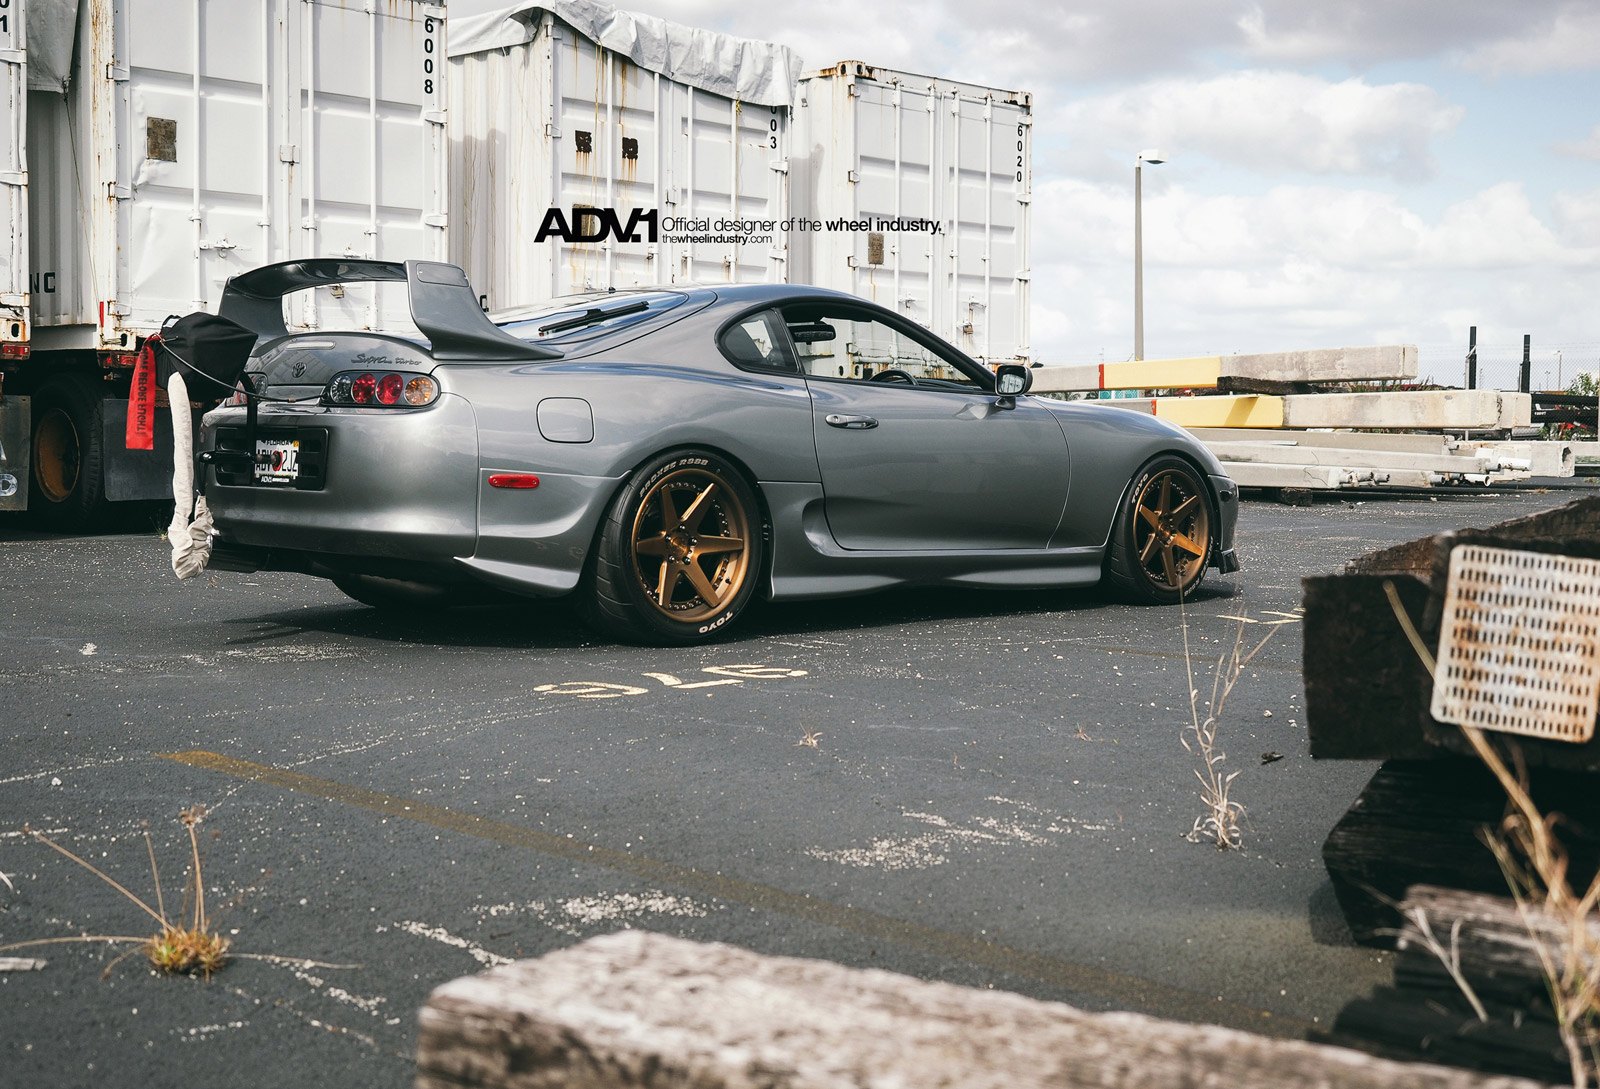 Aftermarket Wing Spoiler on Gray Toyota Supra - Photo by ADV.1